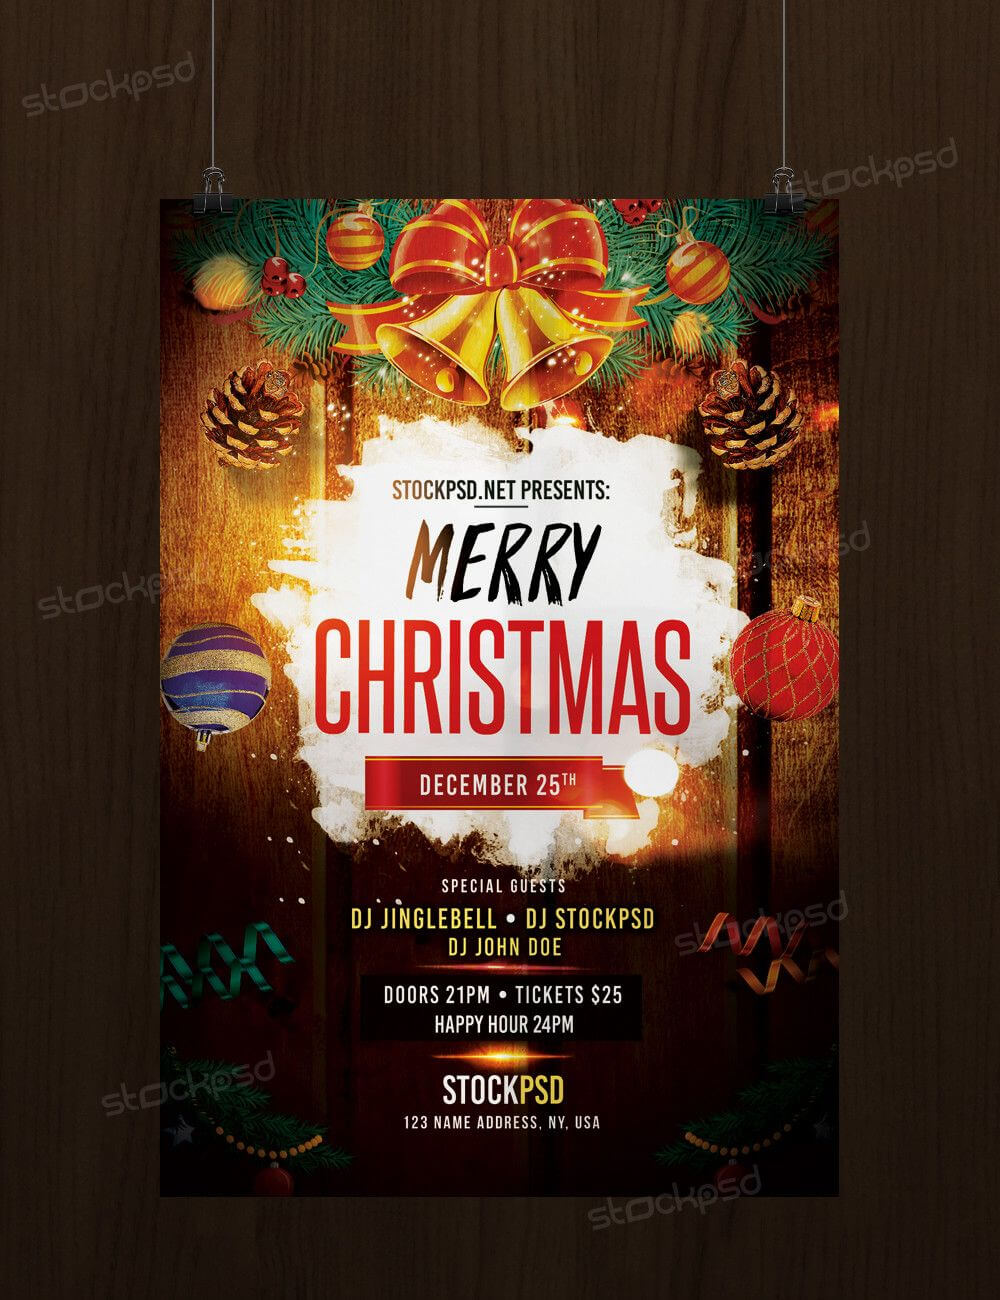 Download+Merry+Christmas+–+Free+Psd+Flyer+Template | Free Inside Christmas Brochure Templates Free